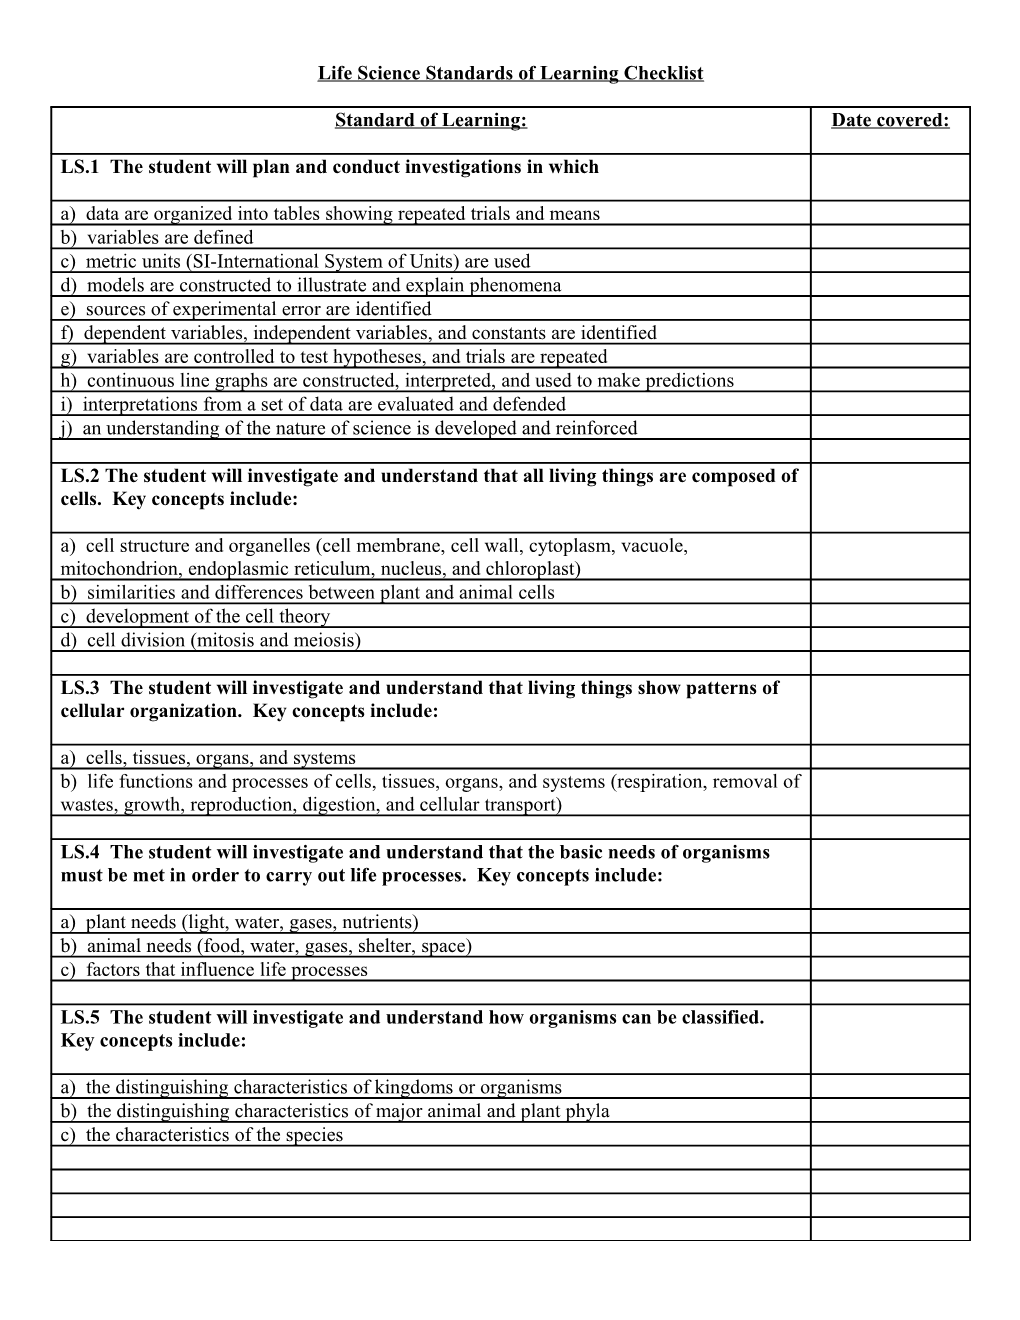 Life Science Standards of Learning Checklist